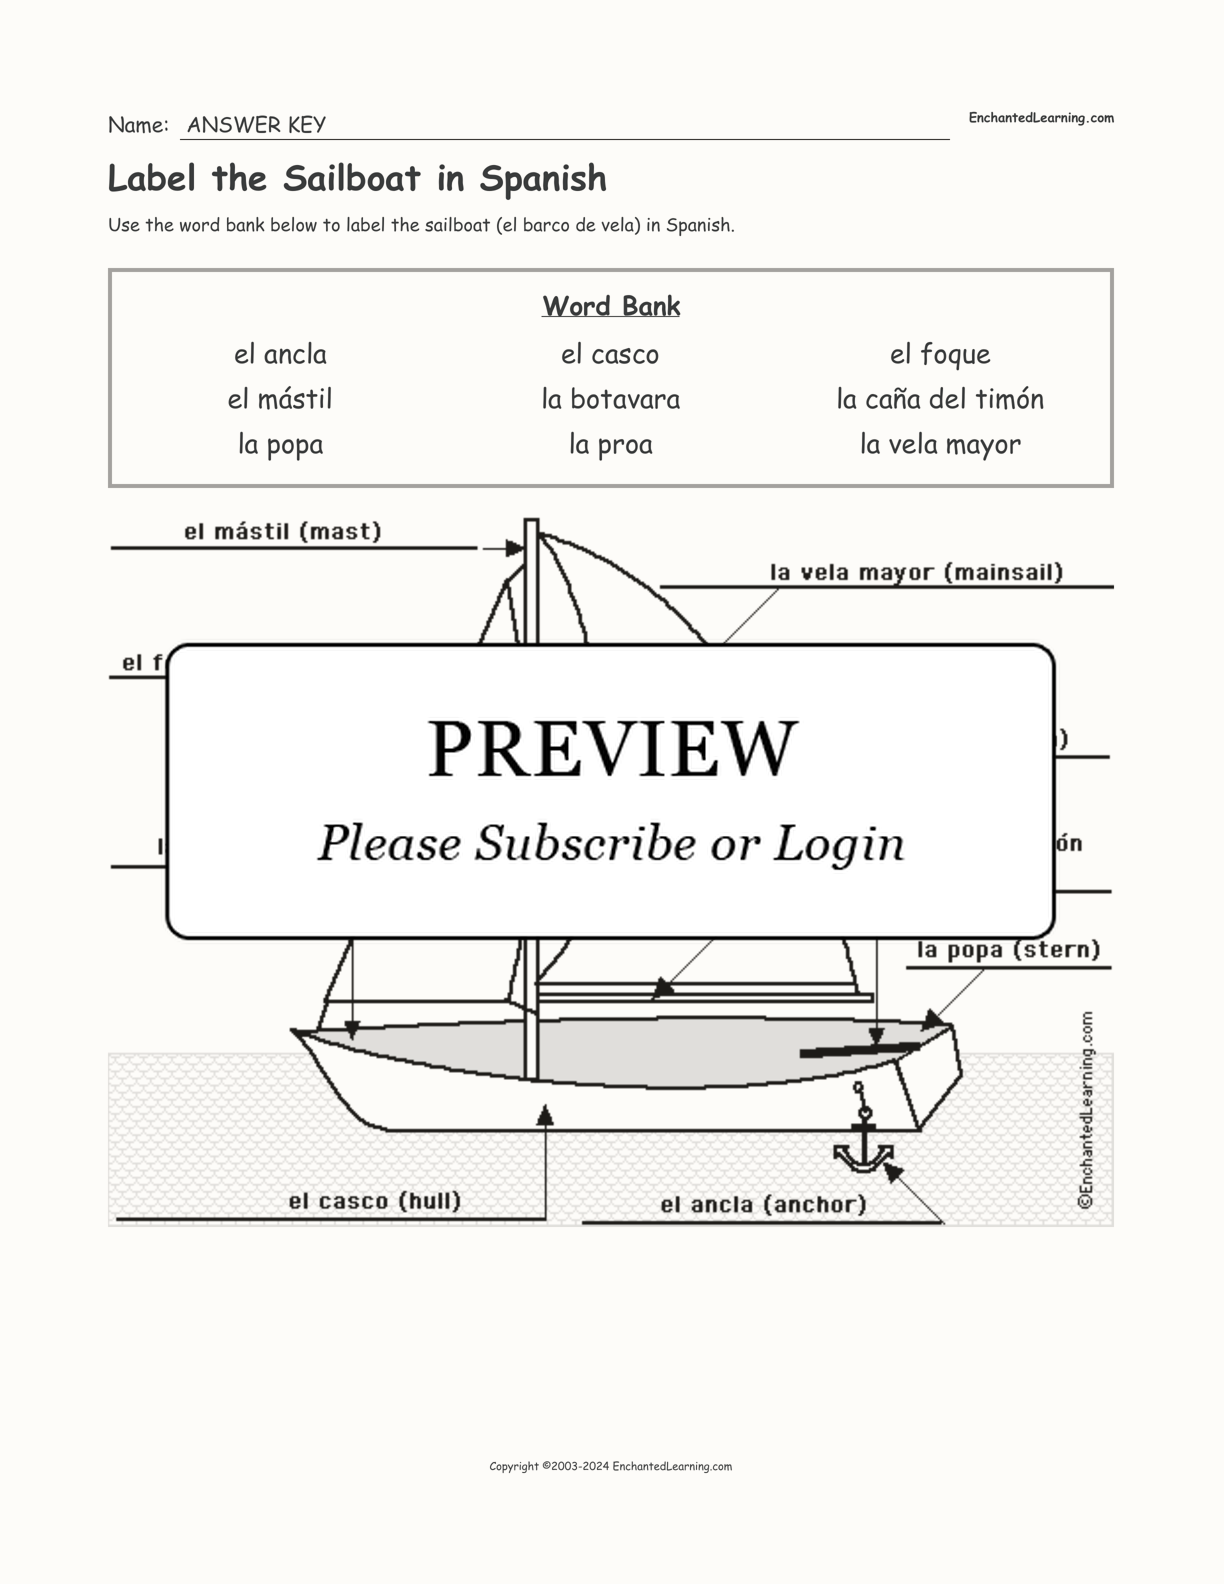 Label the Sailboat in Spanish interactive worksheet page 2